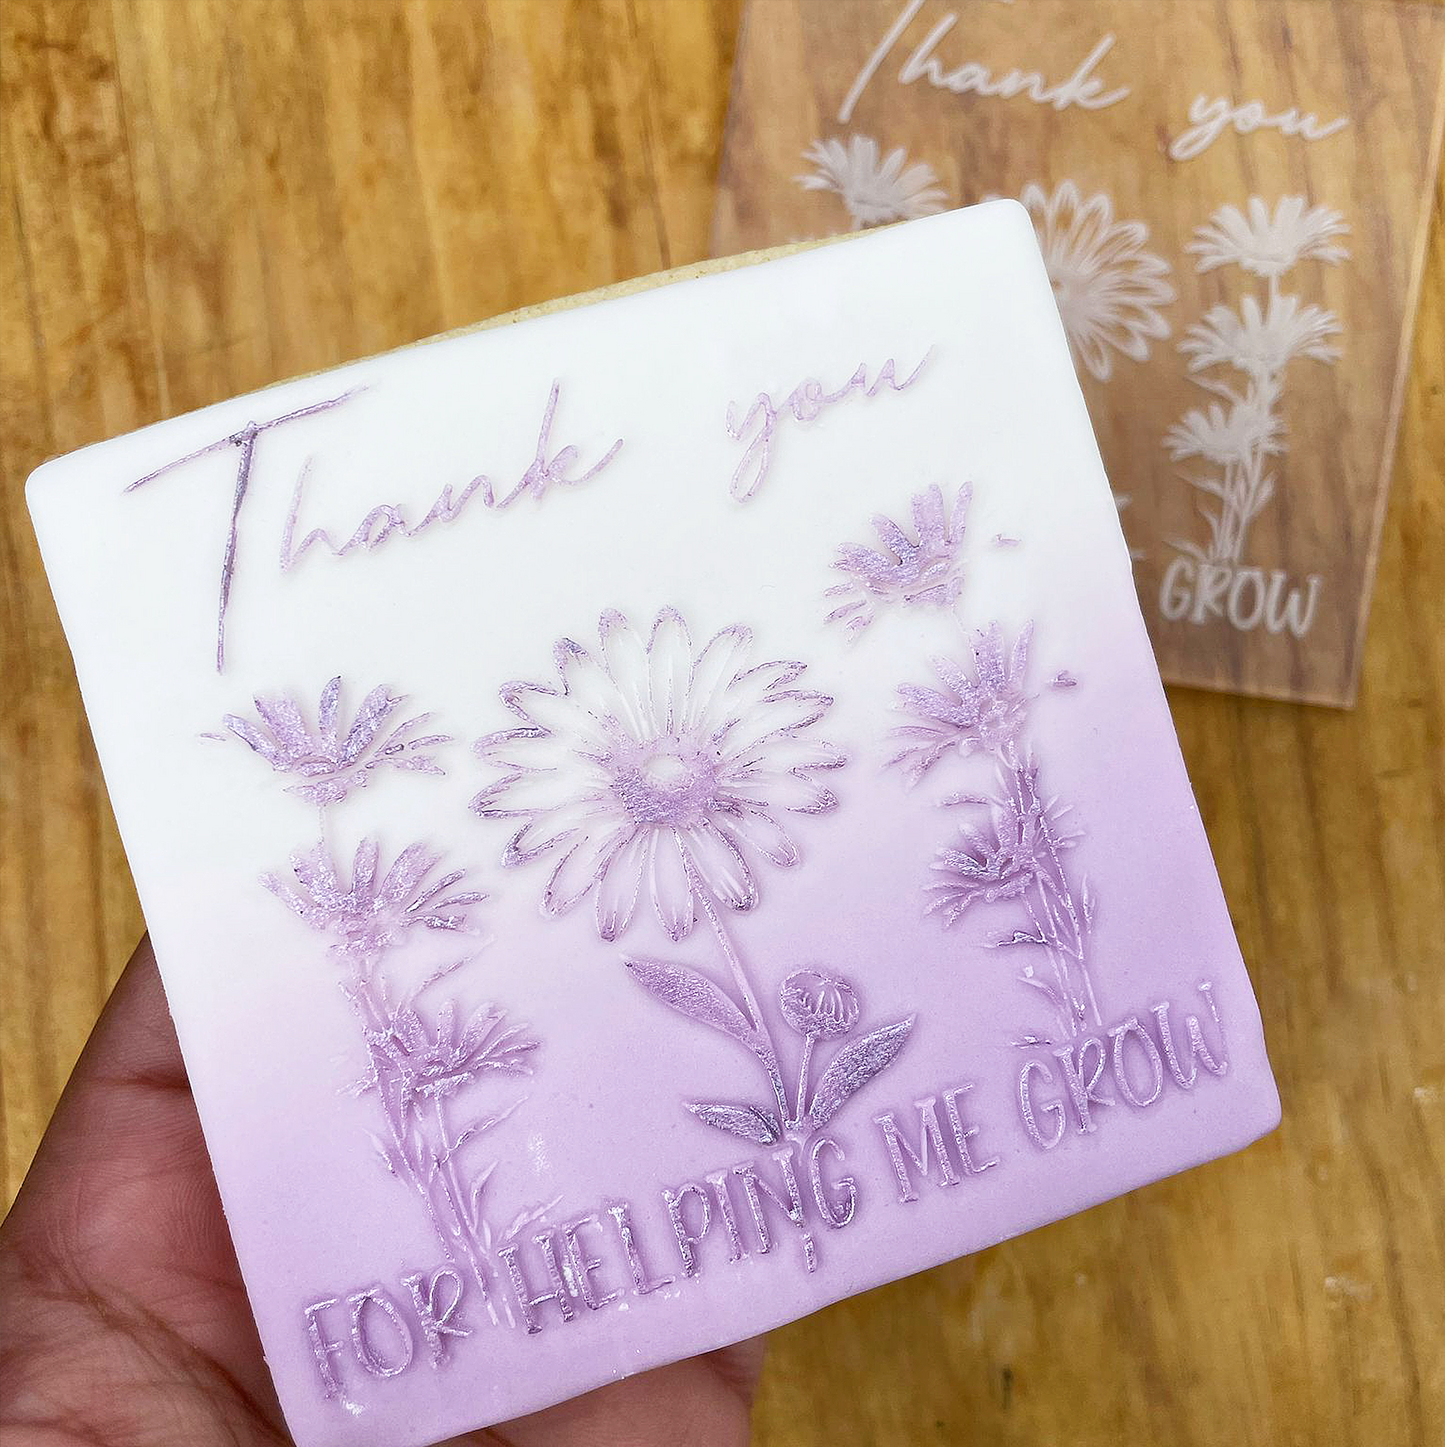 Thank you for Helping me grow - Teachear collection debossing MEG cookie cutters